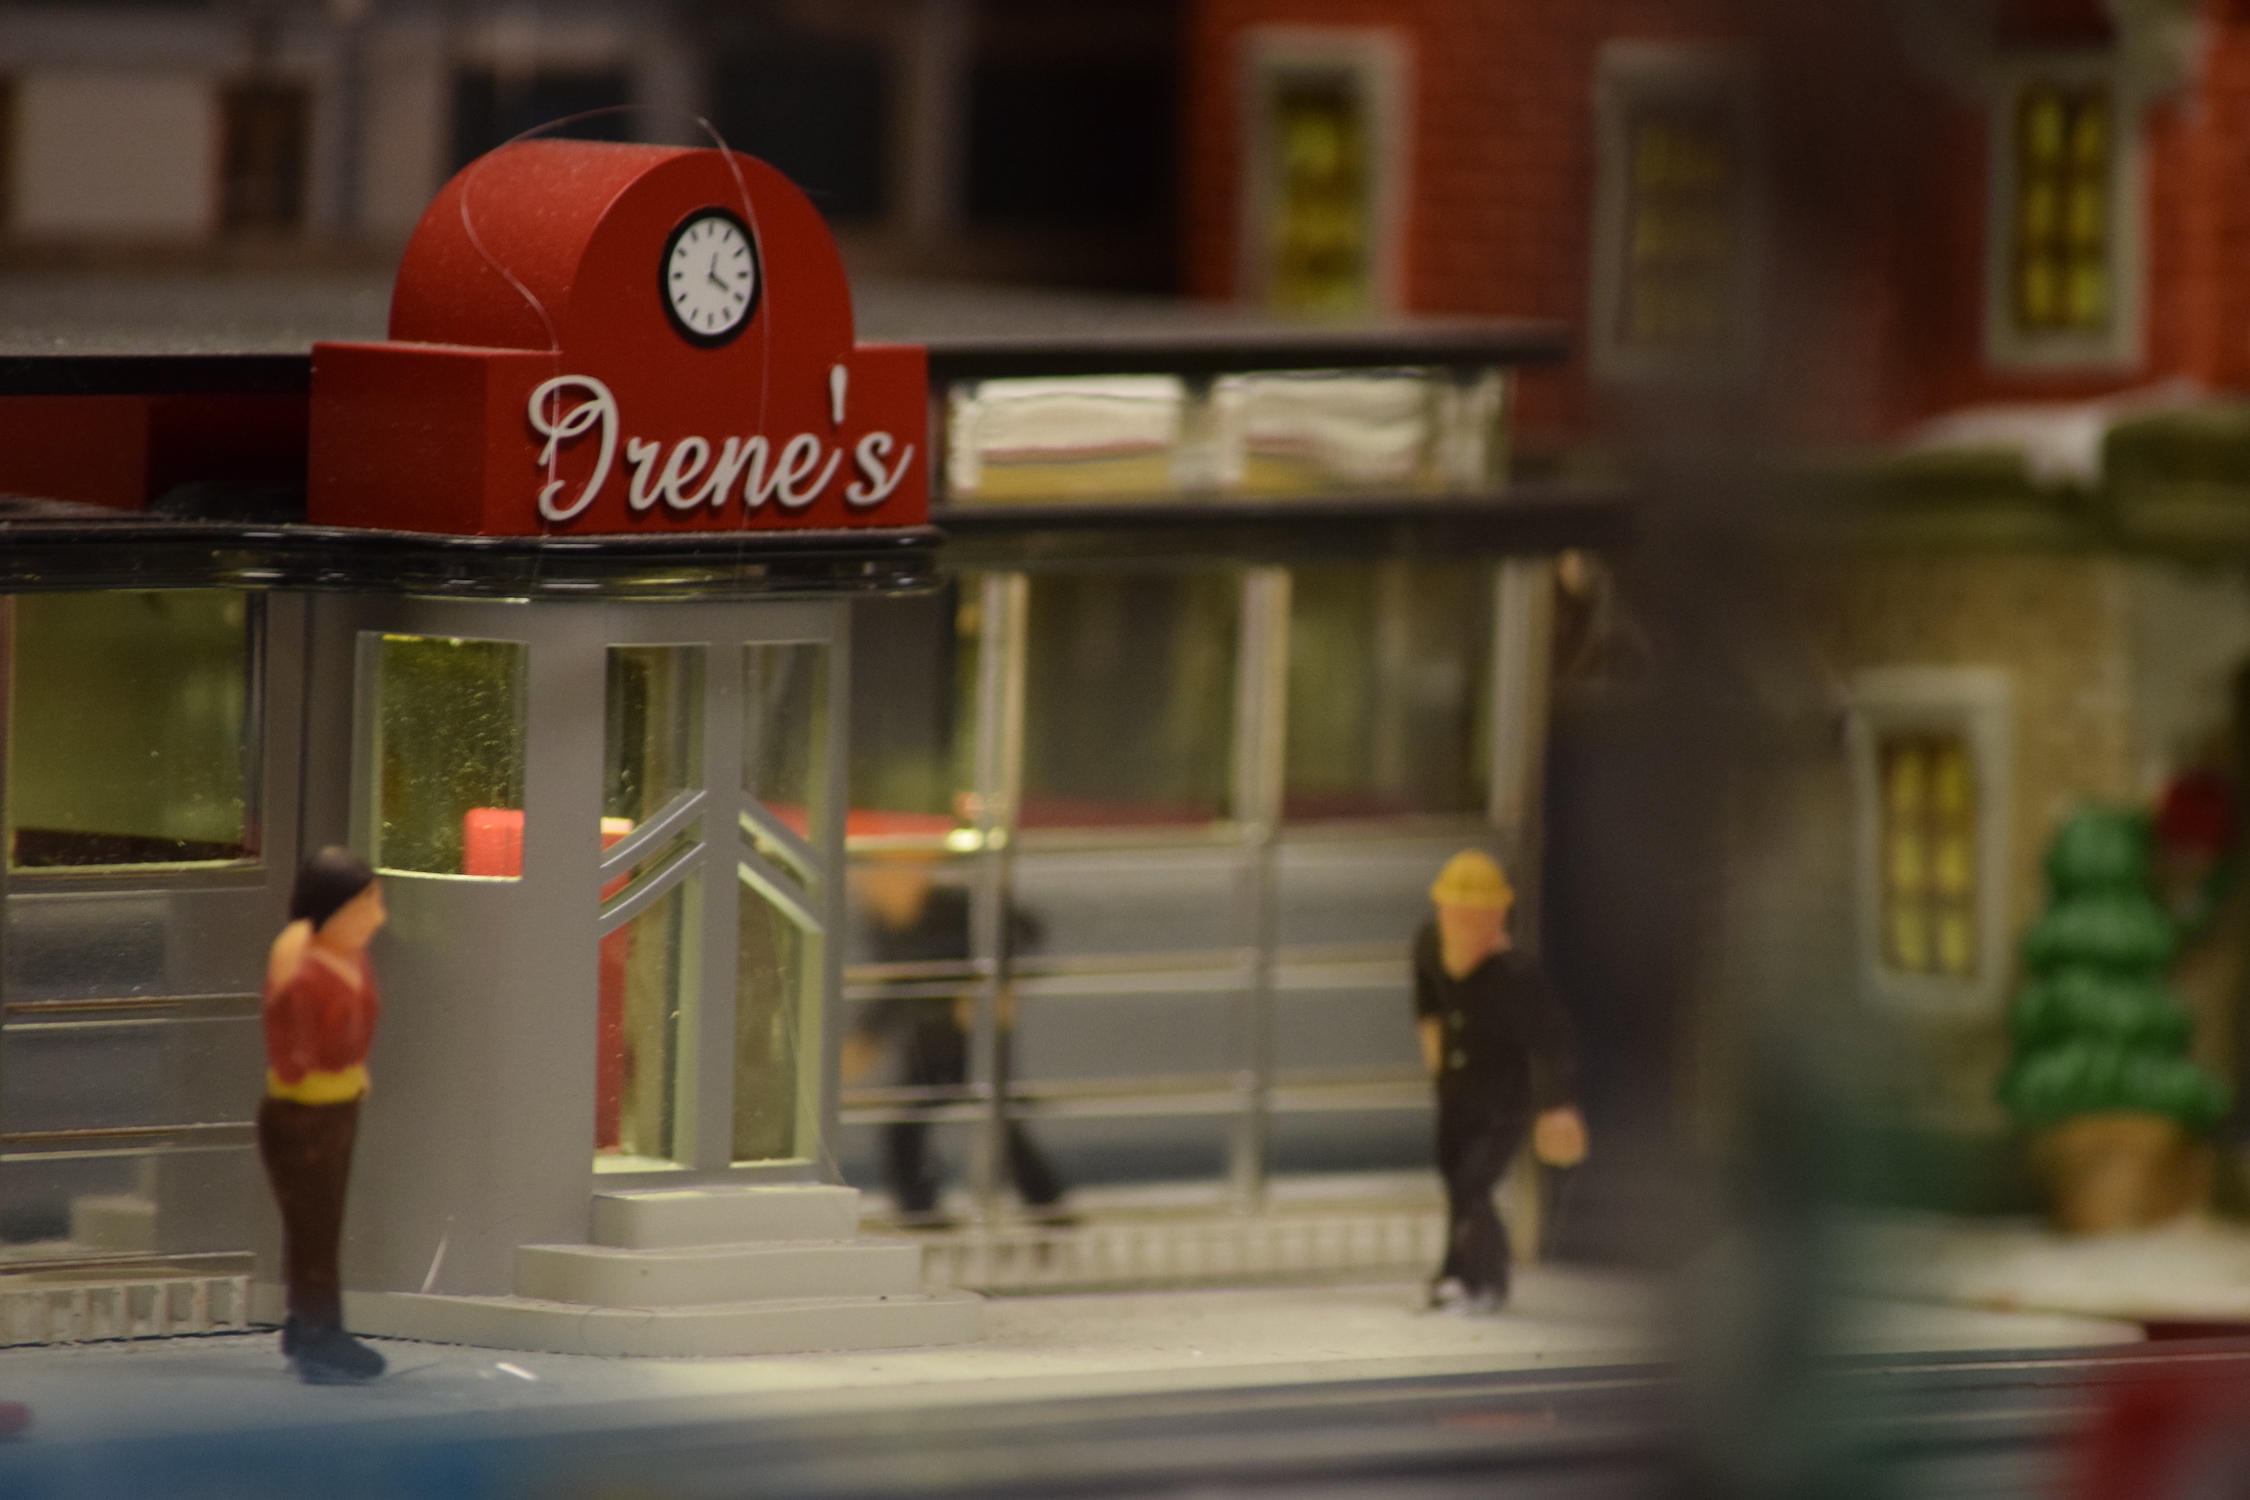 “Irene’s Diner” in town - "Christmas at the Roundhouse" model train display.